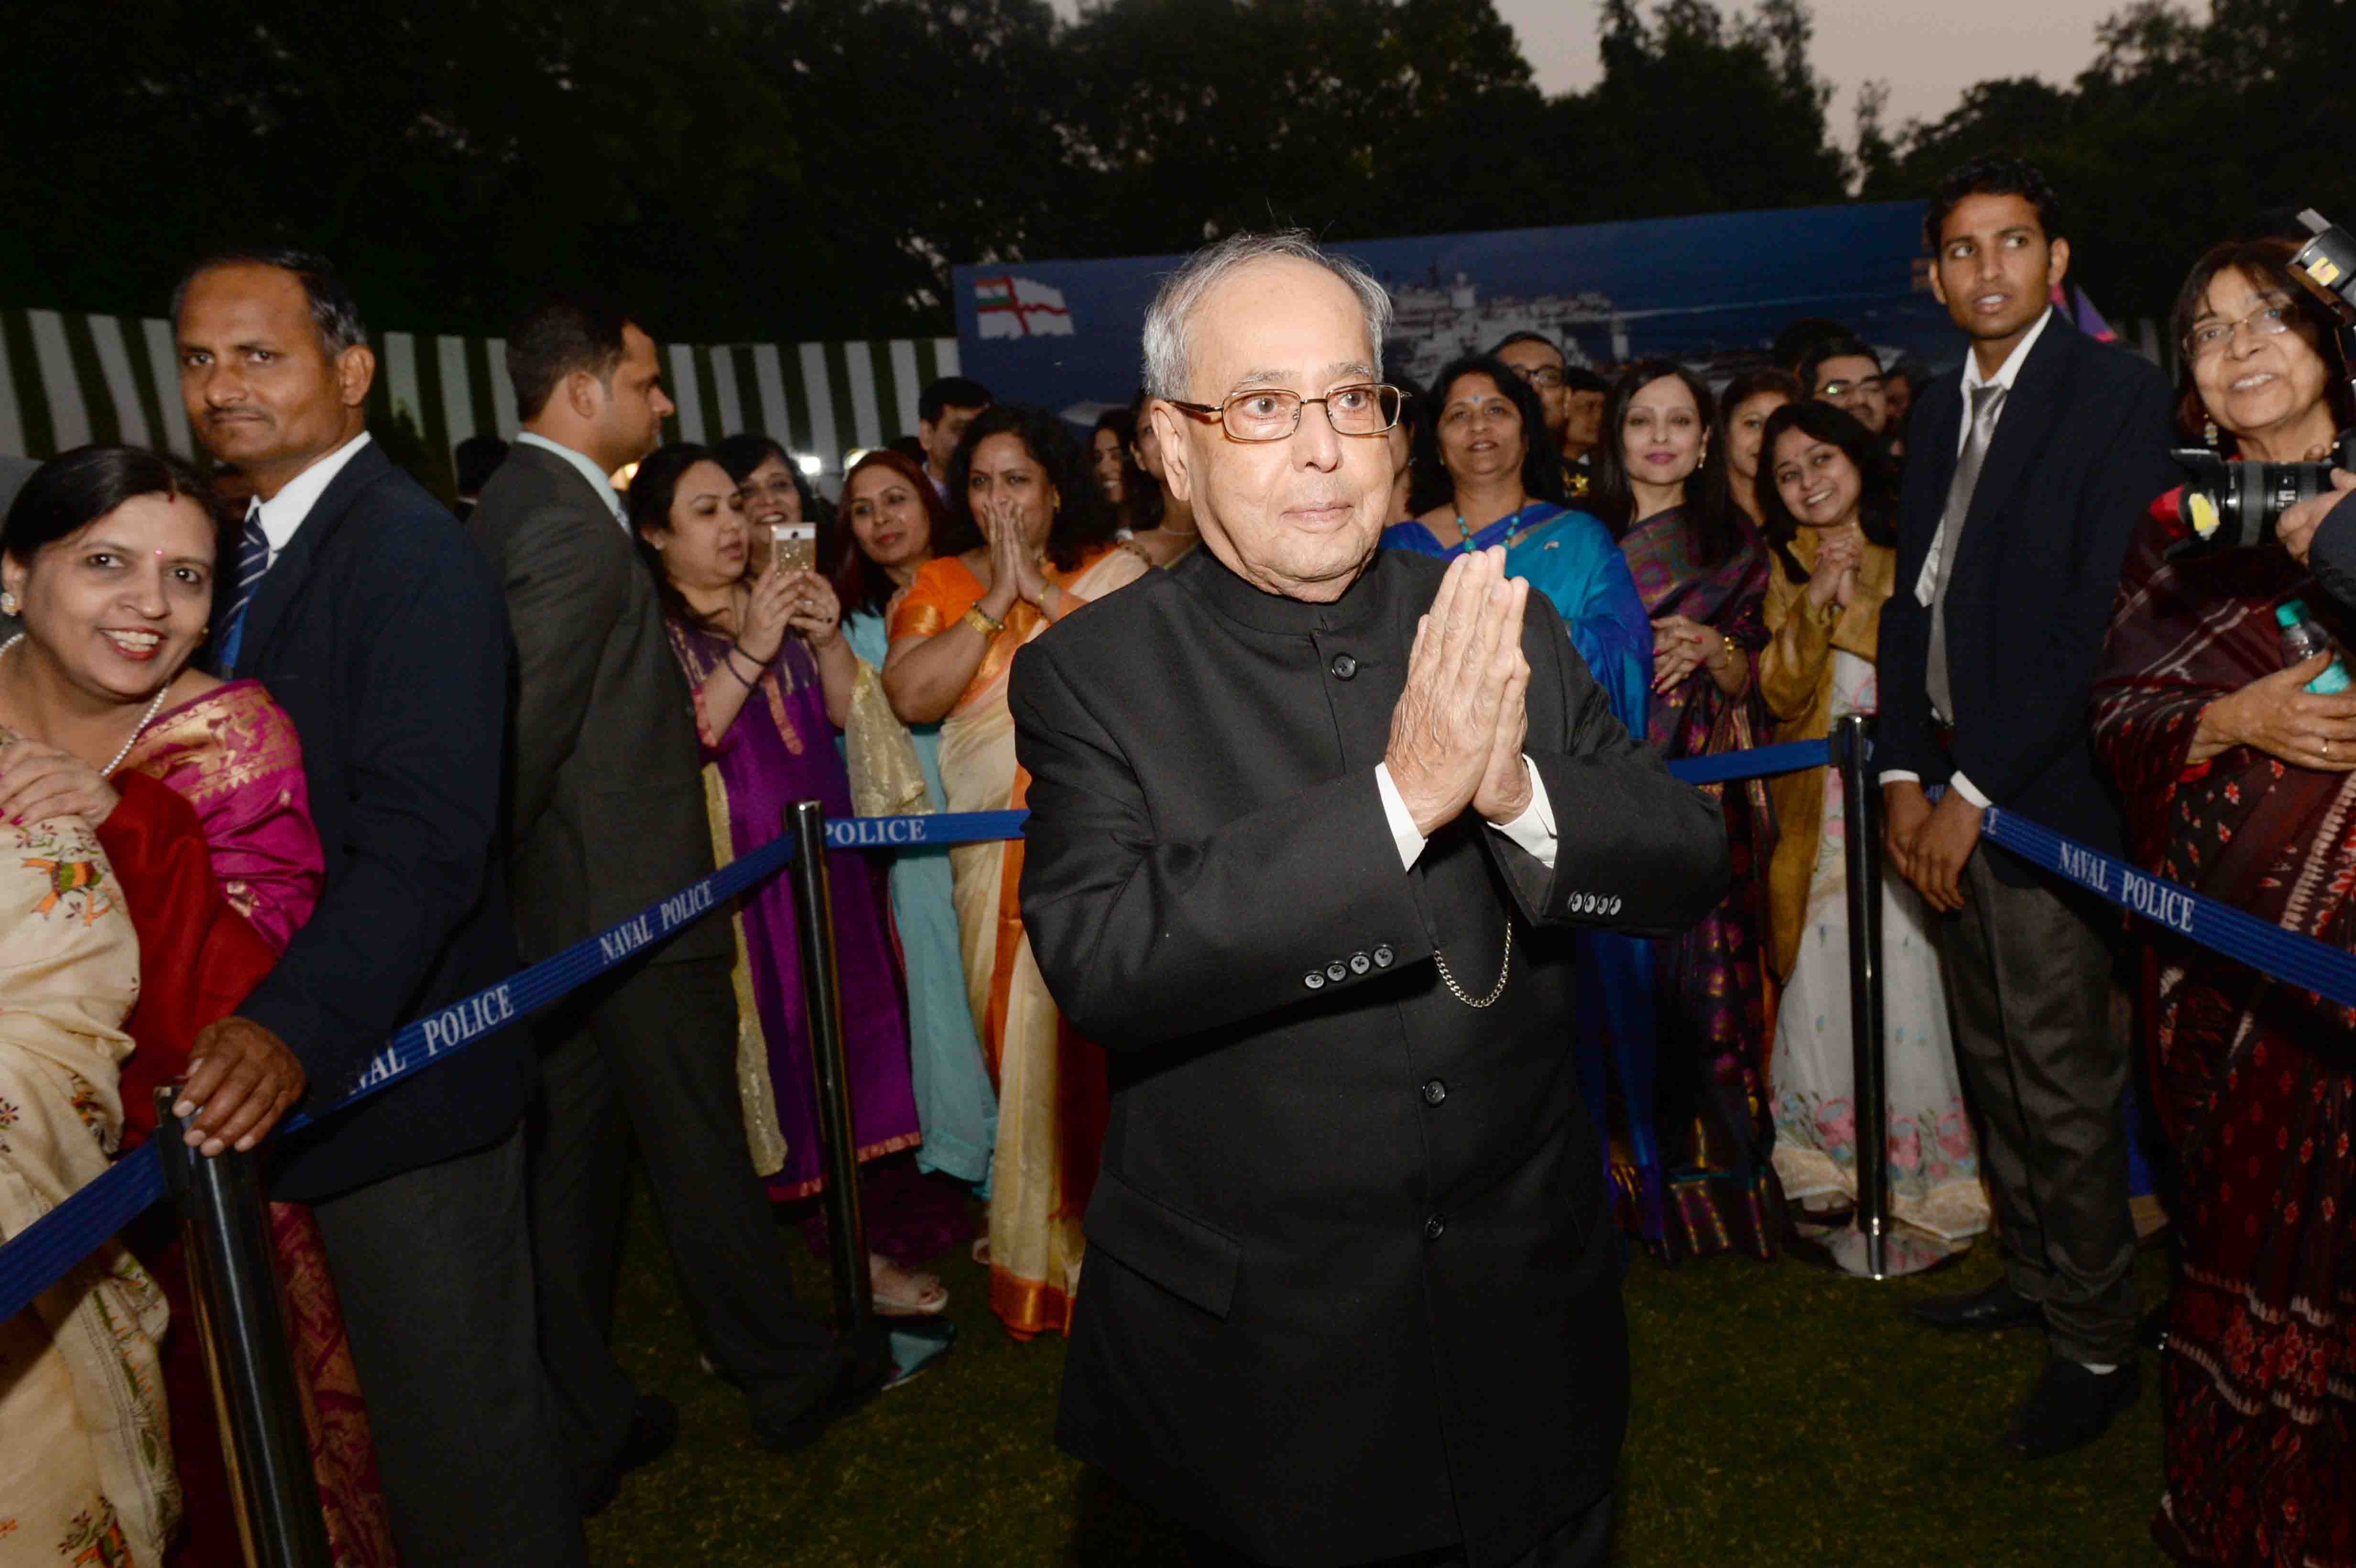  The President of India, Shri Pranab Mukherjee attending the Navy Day Reception hosted by the Chief of the Naval Staff at Navy House in New Delhi on December 4, 2016.